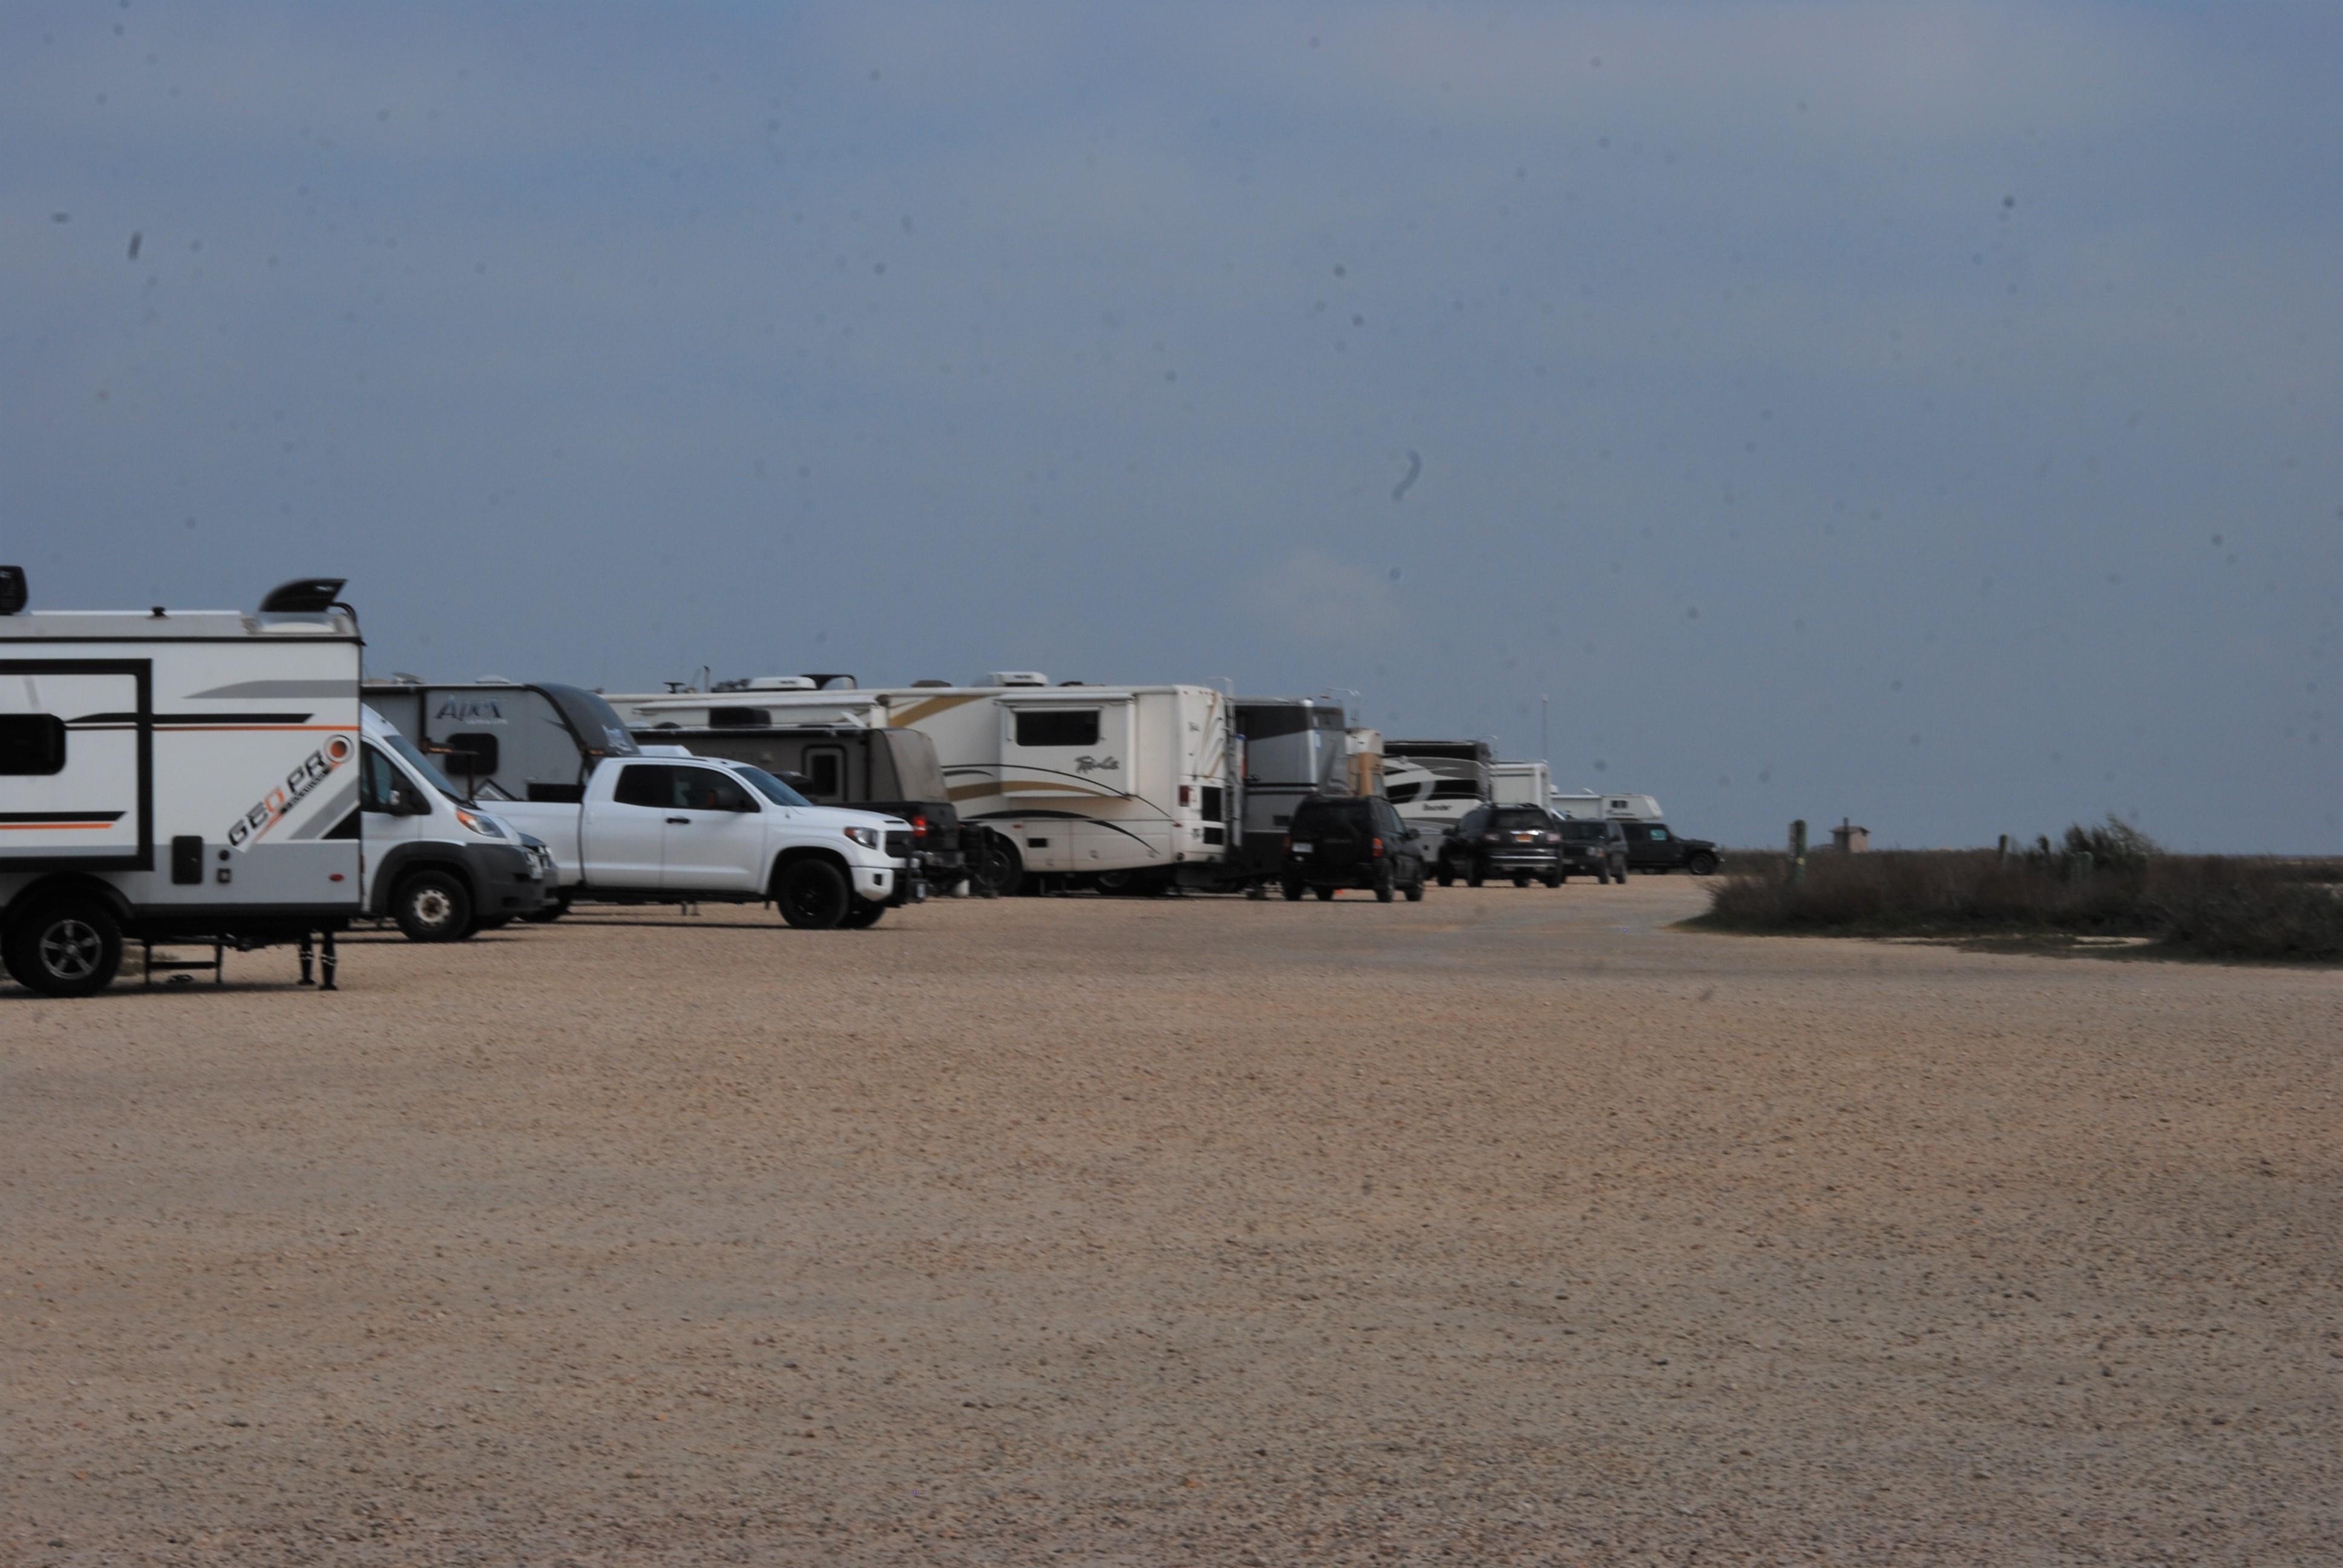 A dozen RVs, vans, buses, and trucks parked side by side in designated gravel campsites